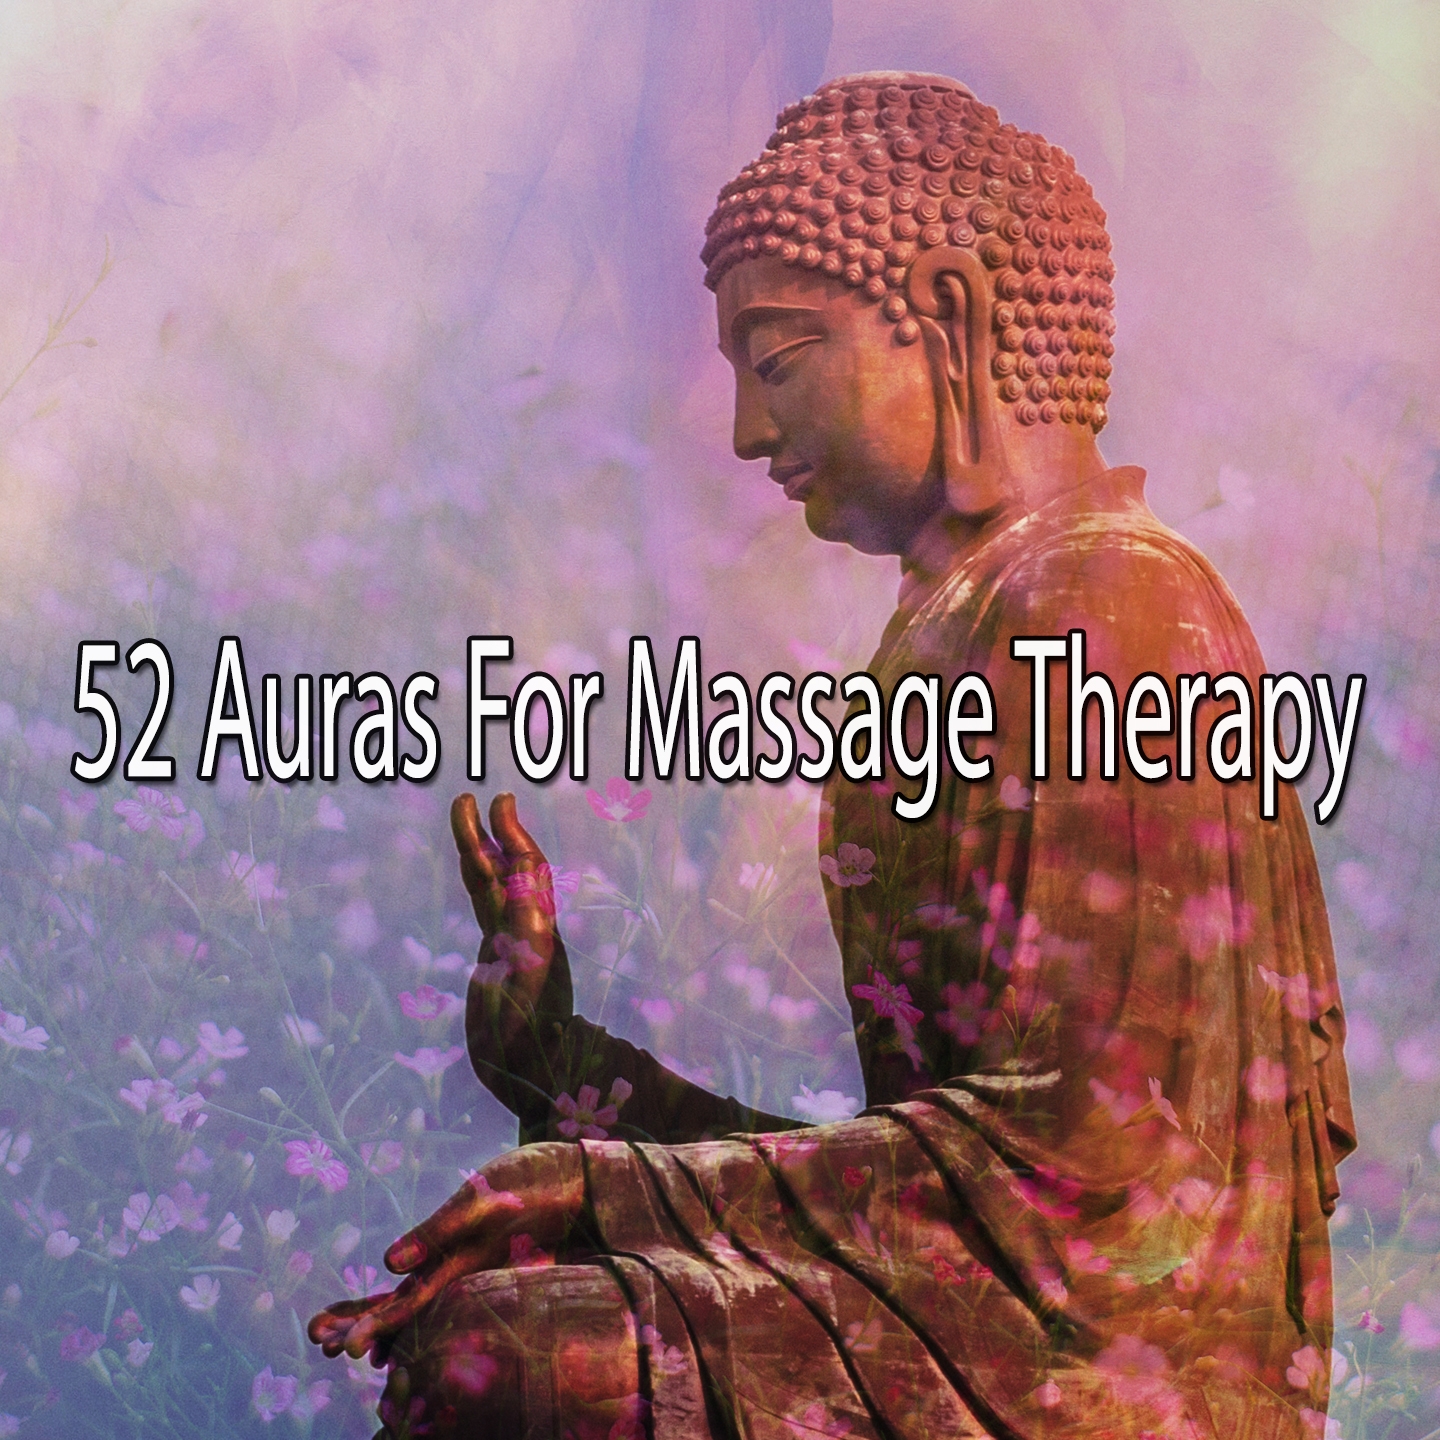 52 Auras For Massage Therapy